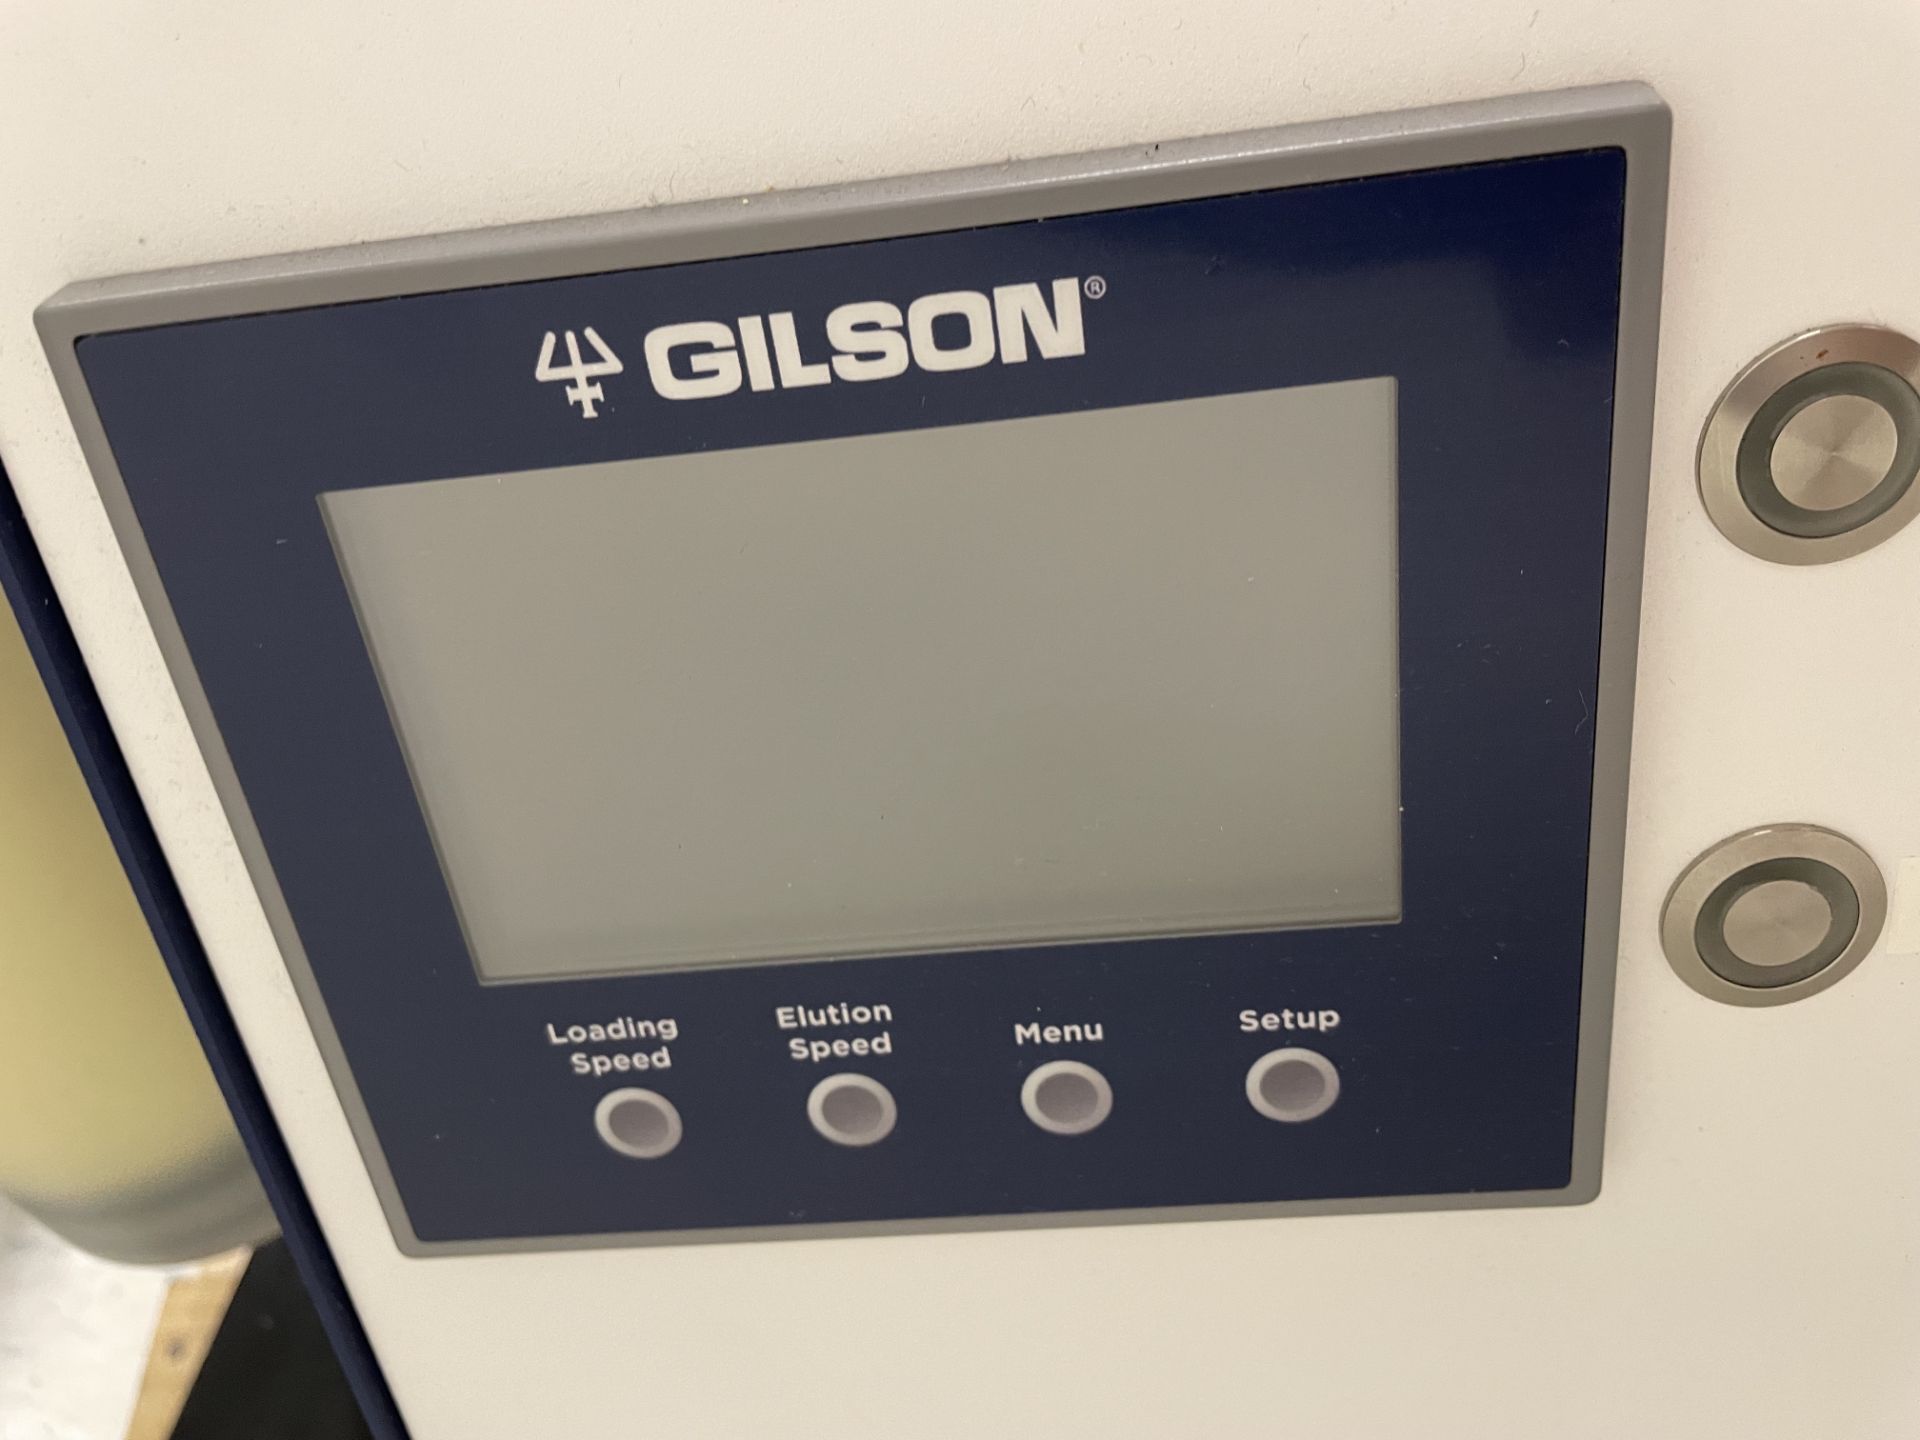 Used Gilson PLC & CLC Set Up W/ Model Gilson CPC 1000 PRO & Gilson Model PLC 2500. COMBINED SYSTEM - Image 10 of 18